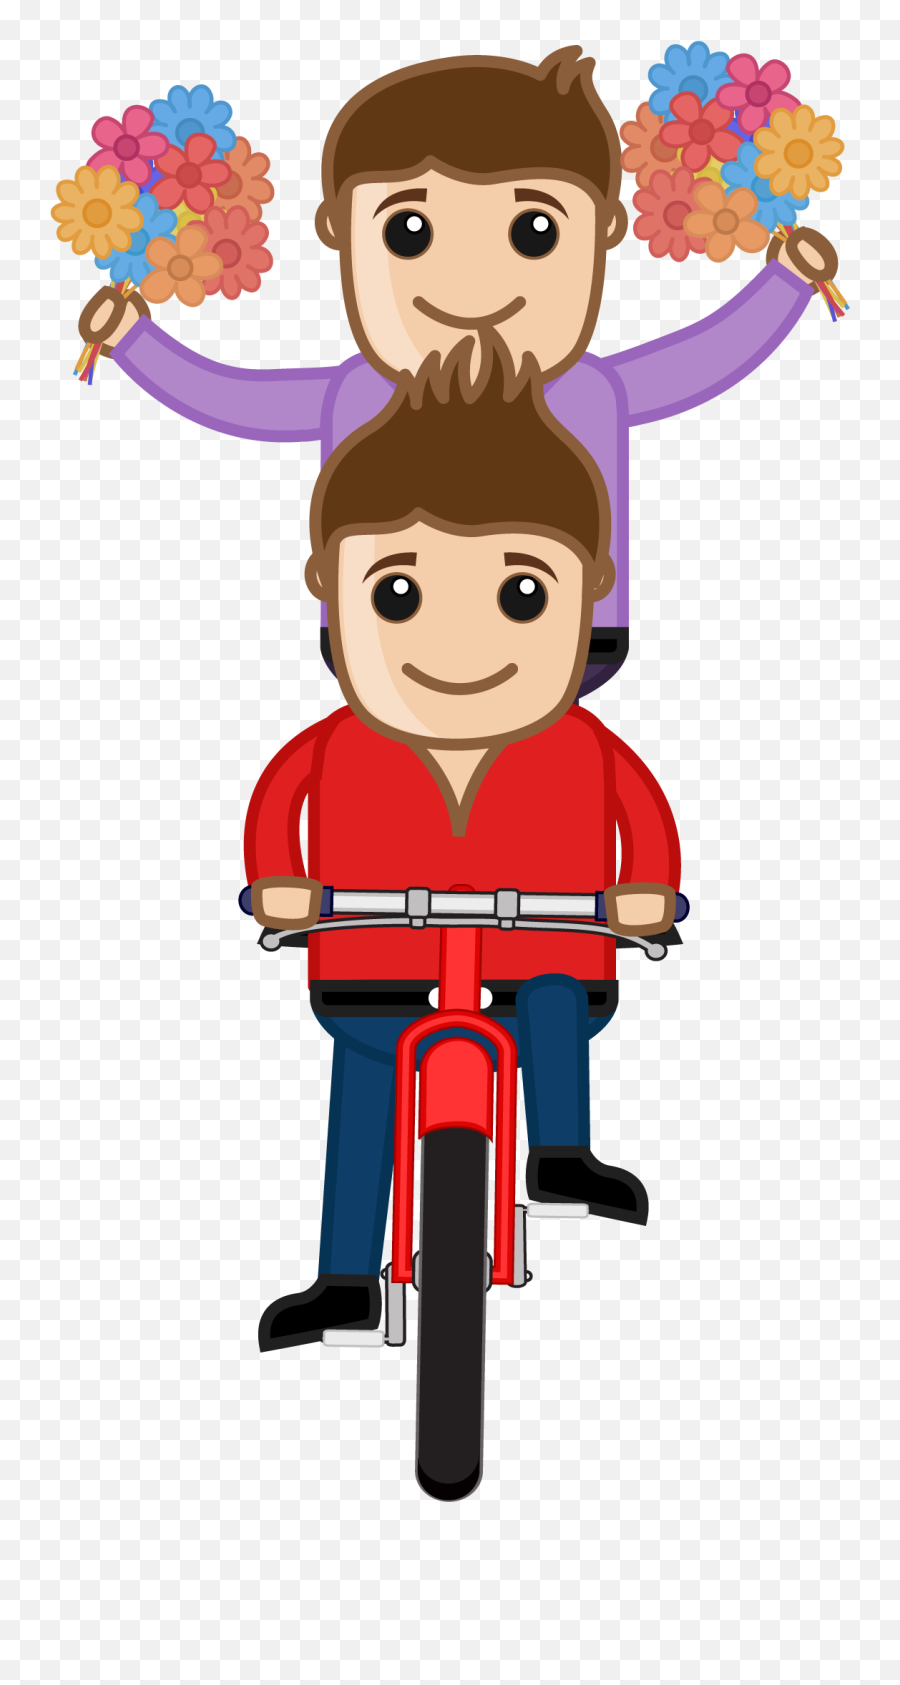 Bicycle Clip Art - Young Boy Riding A Bicycle Hands Holding Emoji,Ride Bike Clipart